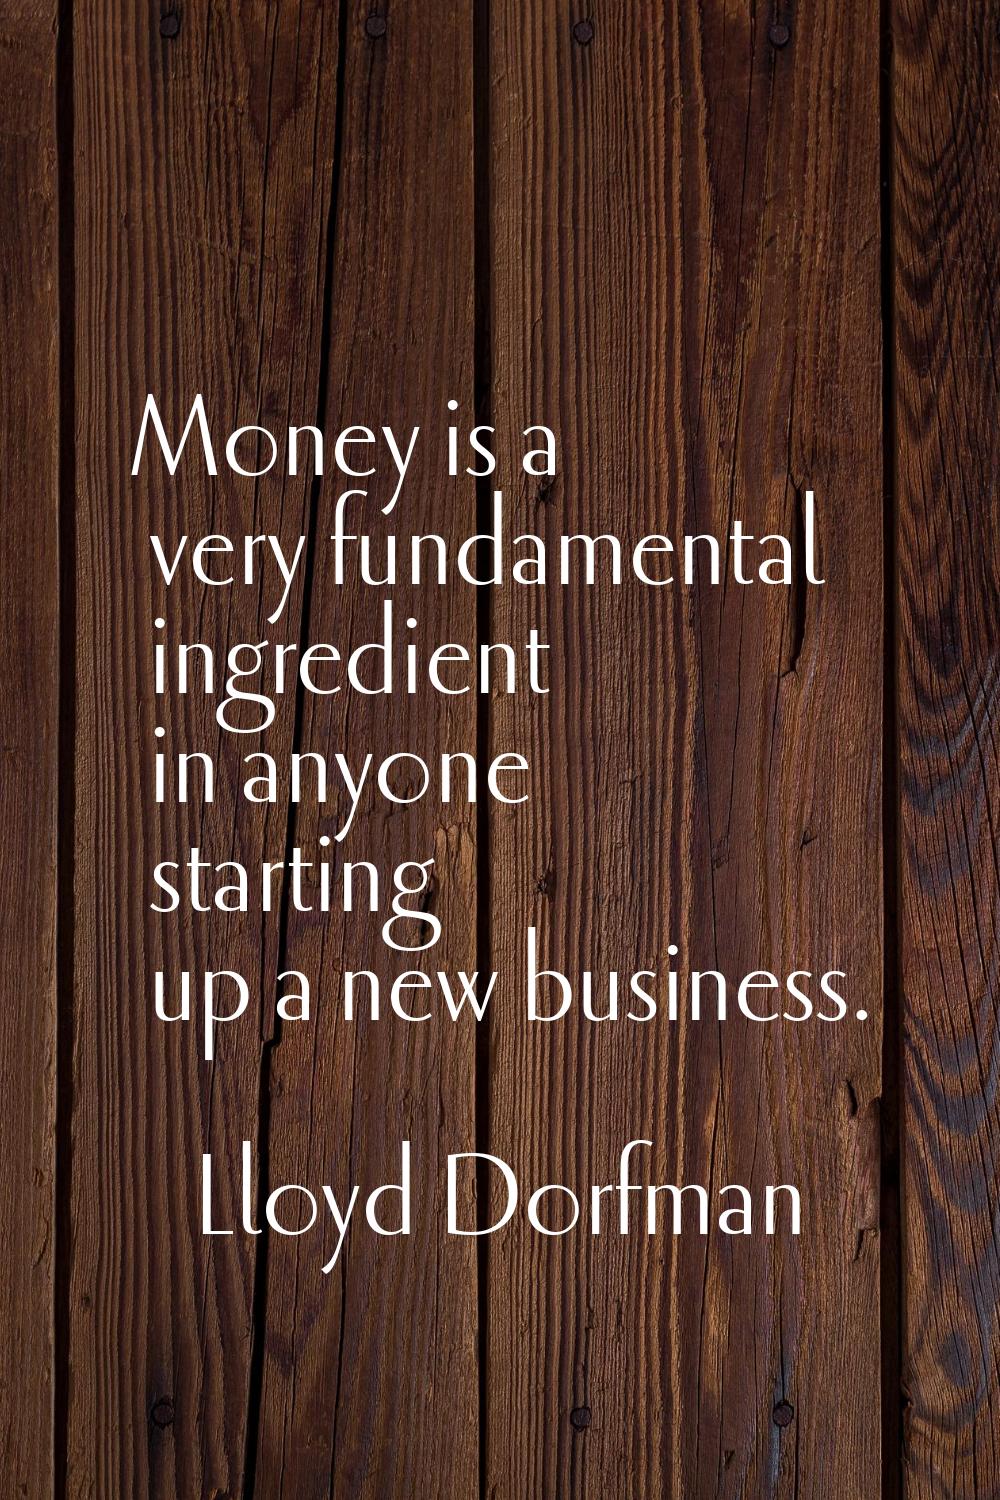 Money is a very fundamental ingredient in anyone starting up a new business.